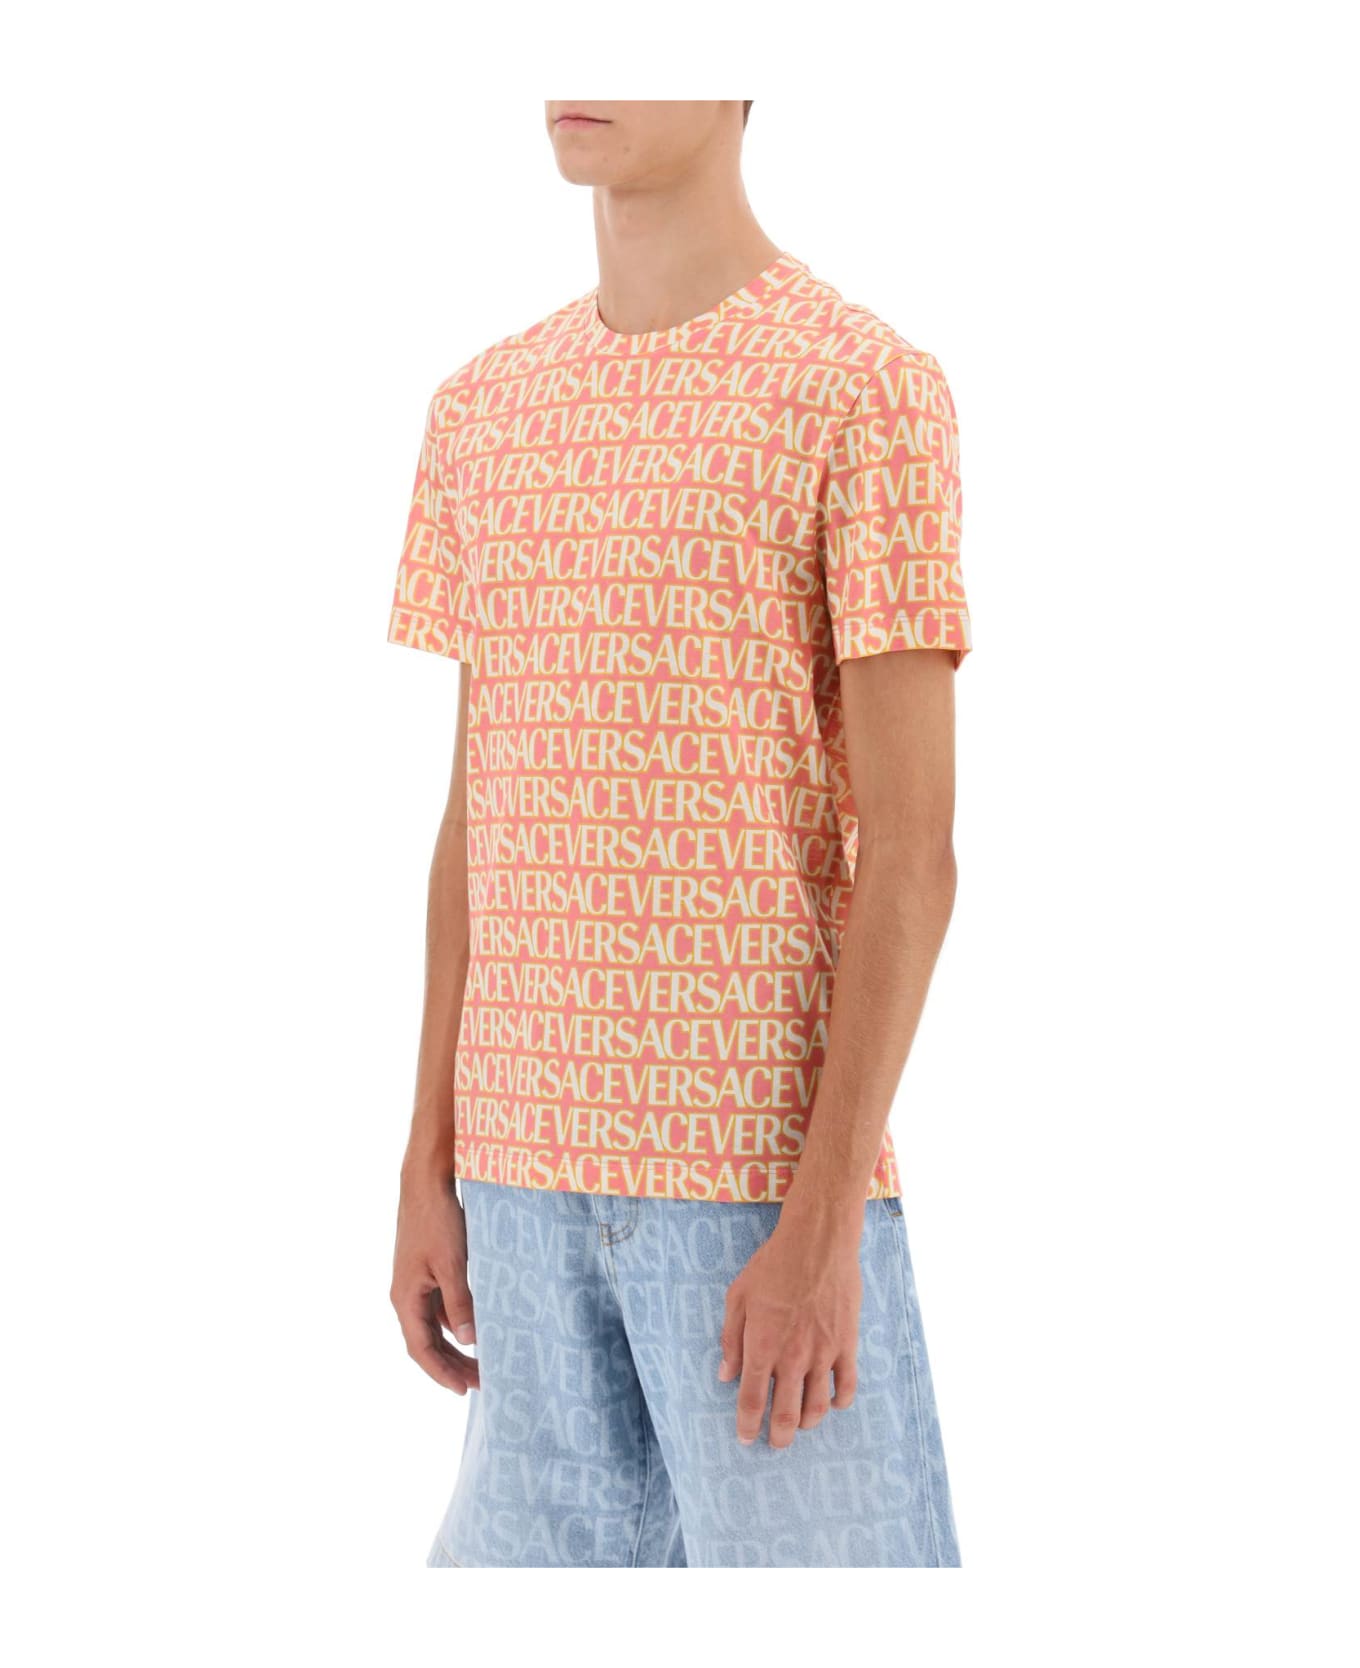 Versace Allover T-shirt - PINK IVORY (White)